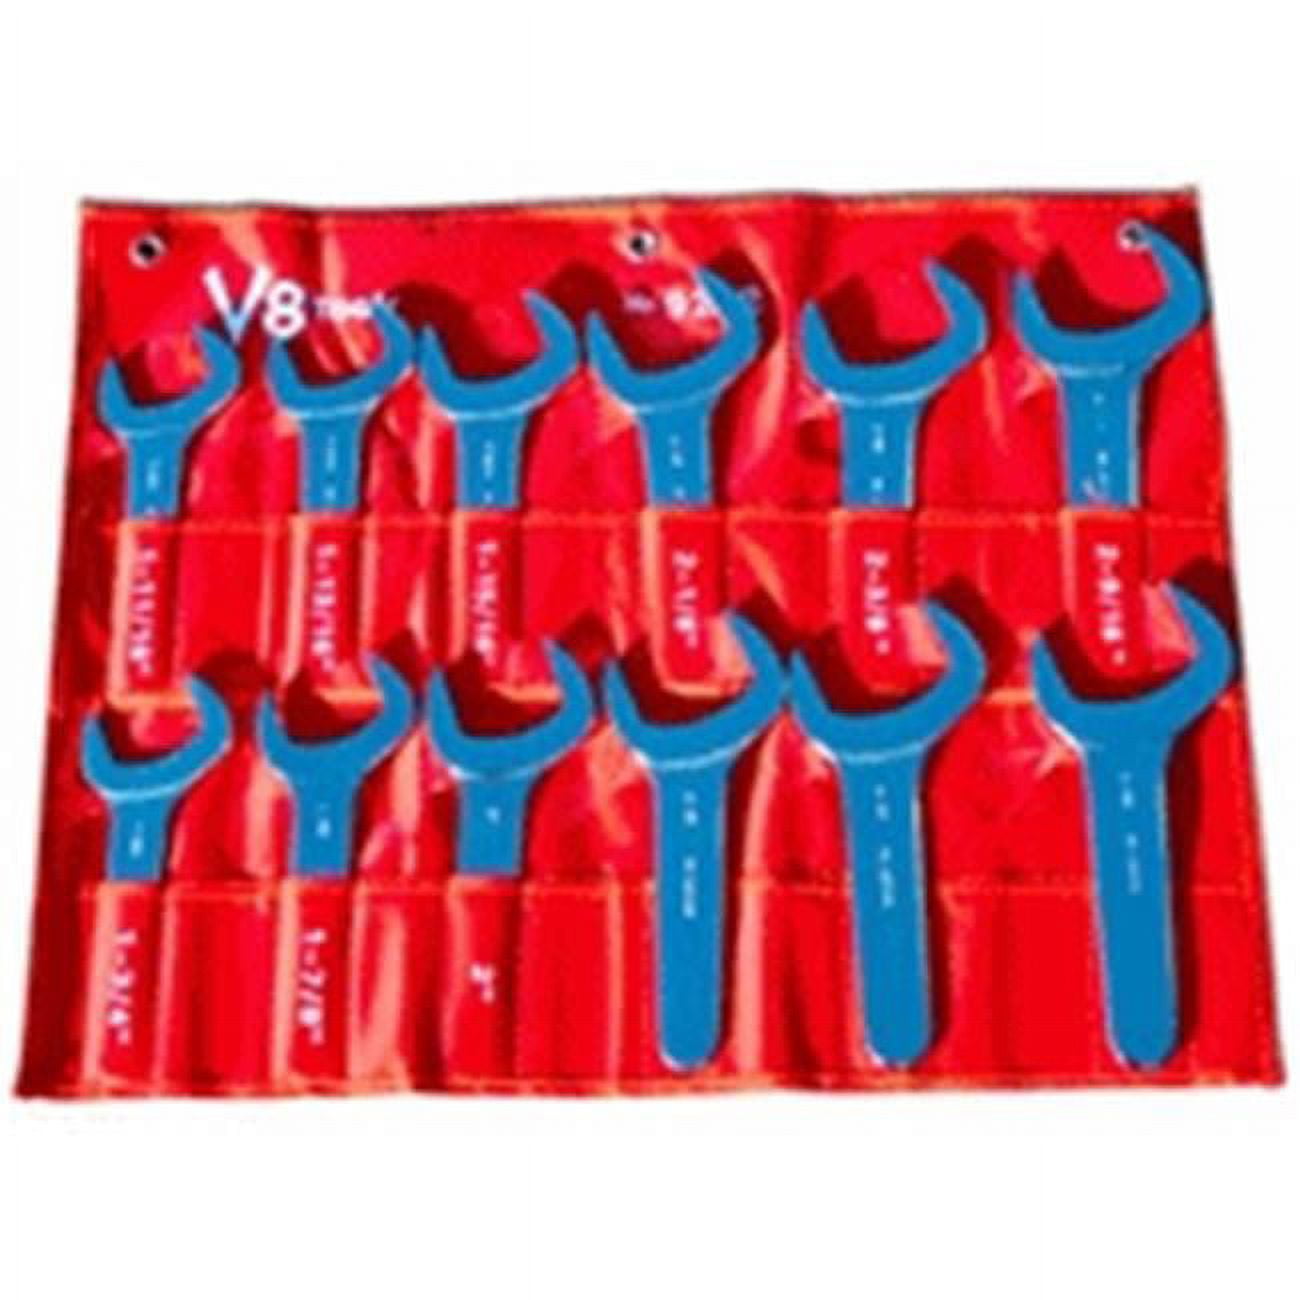 V8 Hand Tools VHT-9212 0.69 - 2.63 in. Jumbo Service Wrench Set, 12 Piece 